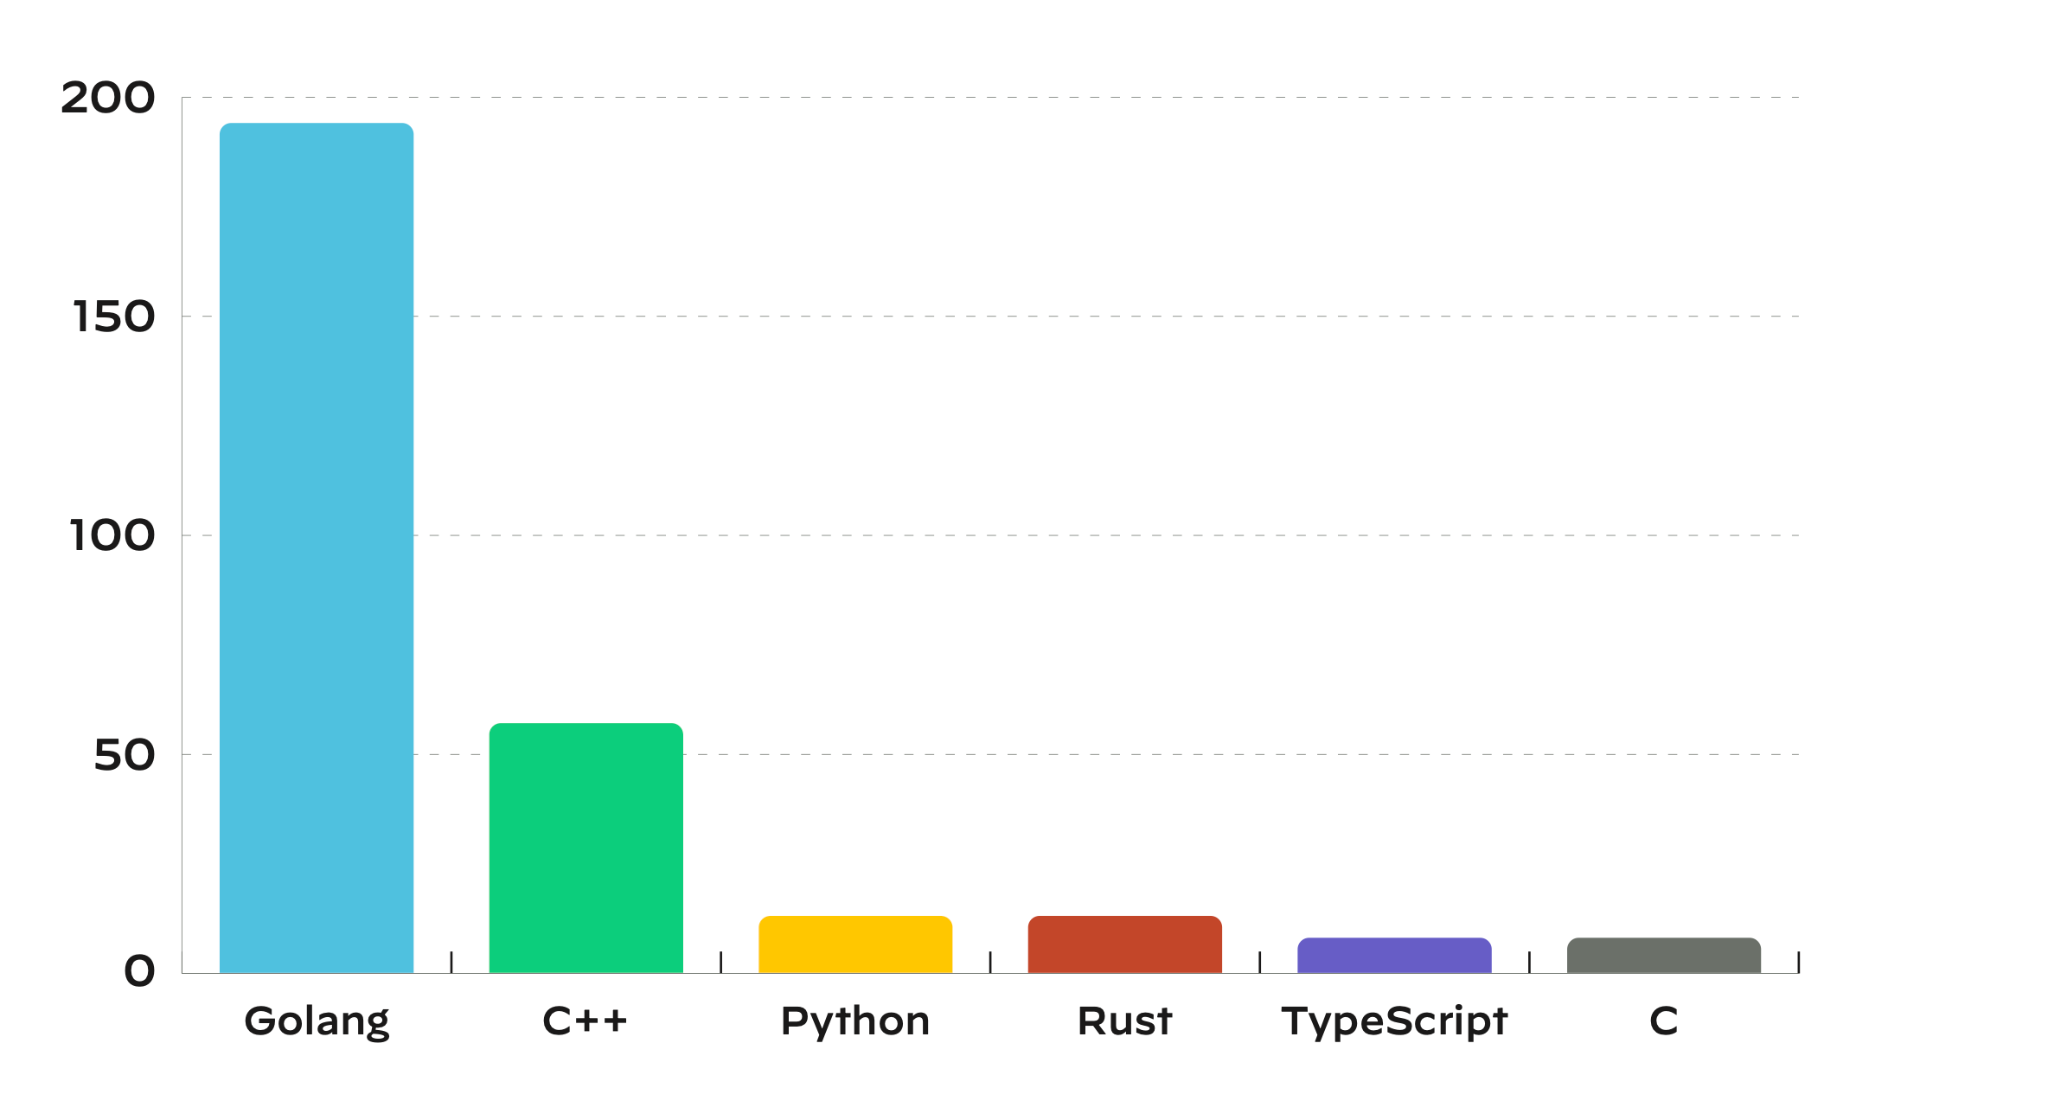 A graph showing the number of vulnerabilities in CNCF projects categorized by language with Golang as the majority, followed by C++ and Python.